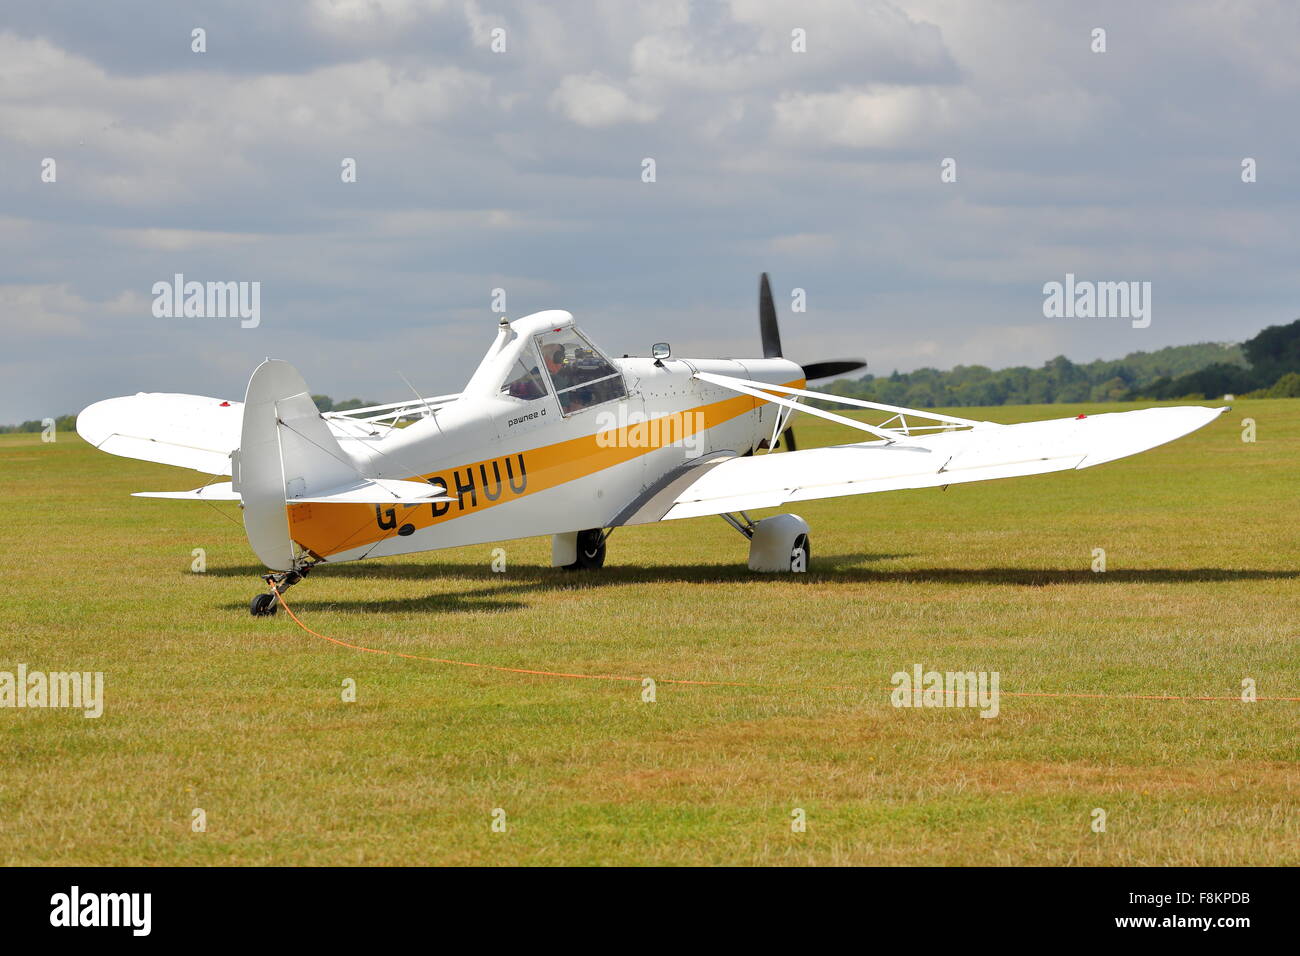 Piper Pawnee PA-25 D G-BHUU tug in azione a Booker Airfield, Wycombe Airpark Foto Stock